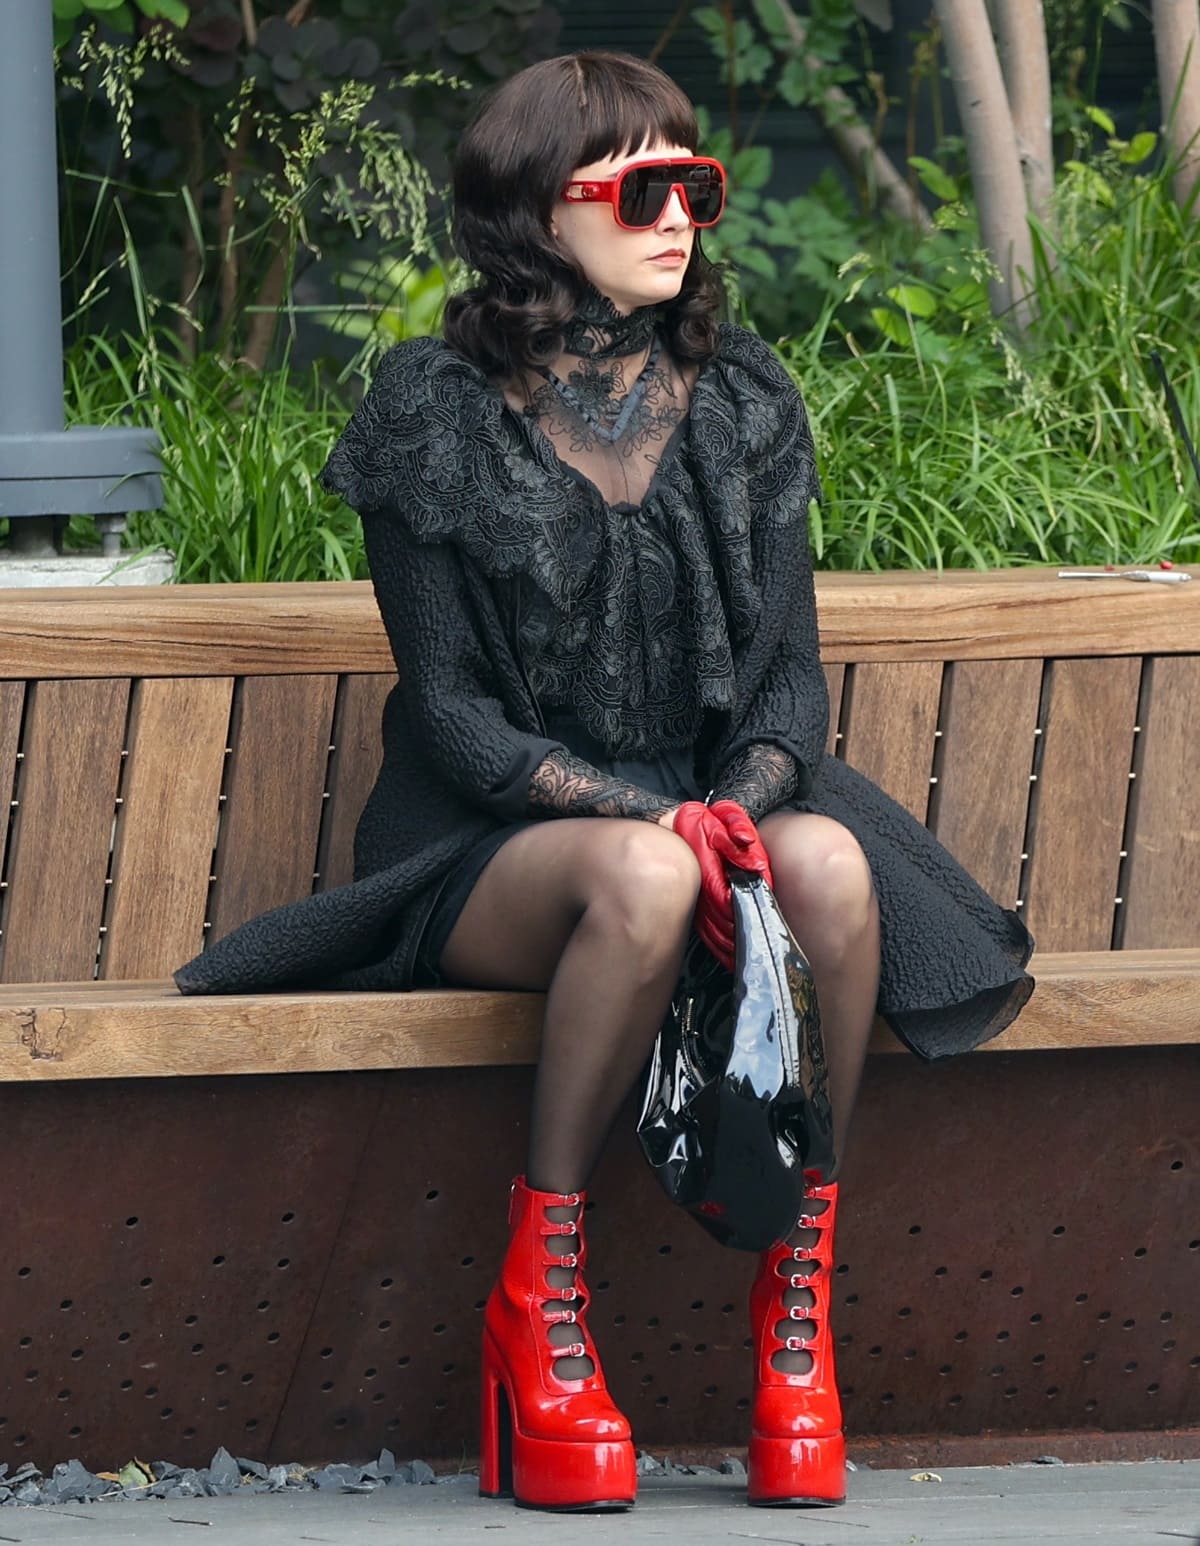 Cara Delevingne working on the set of American Horror Story's 12th season in New York City in a gothic black lace dress, a matching cloak, black stockings, and sky-high red patent leather heels